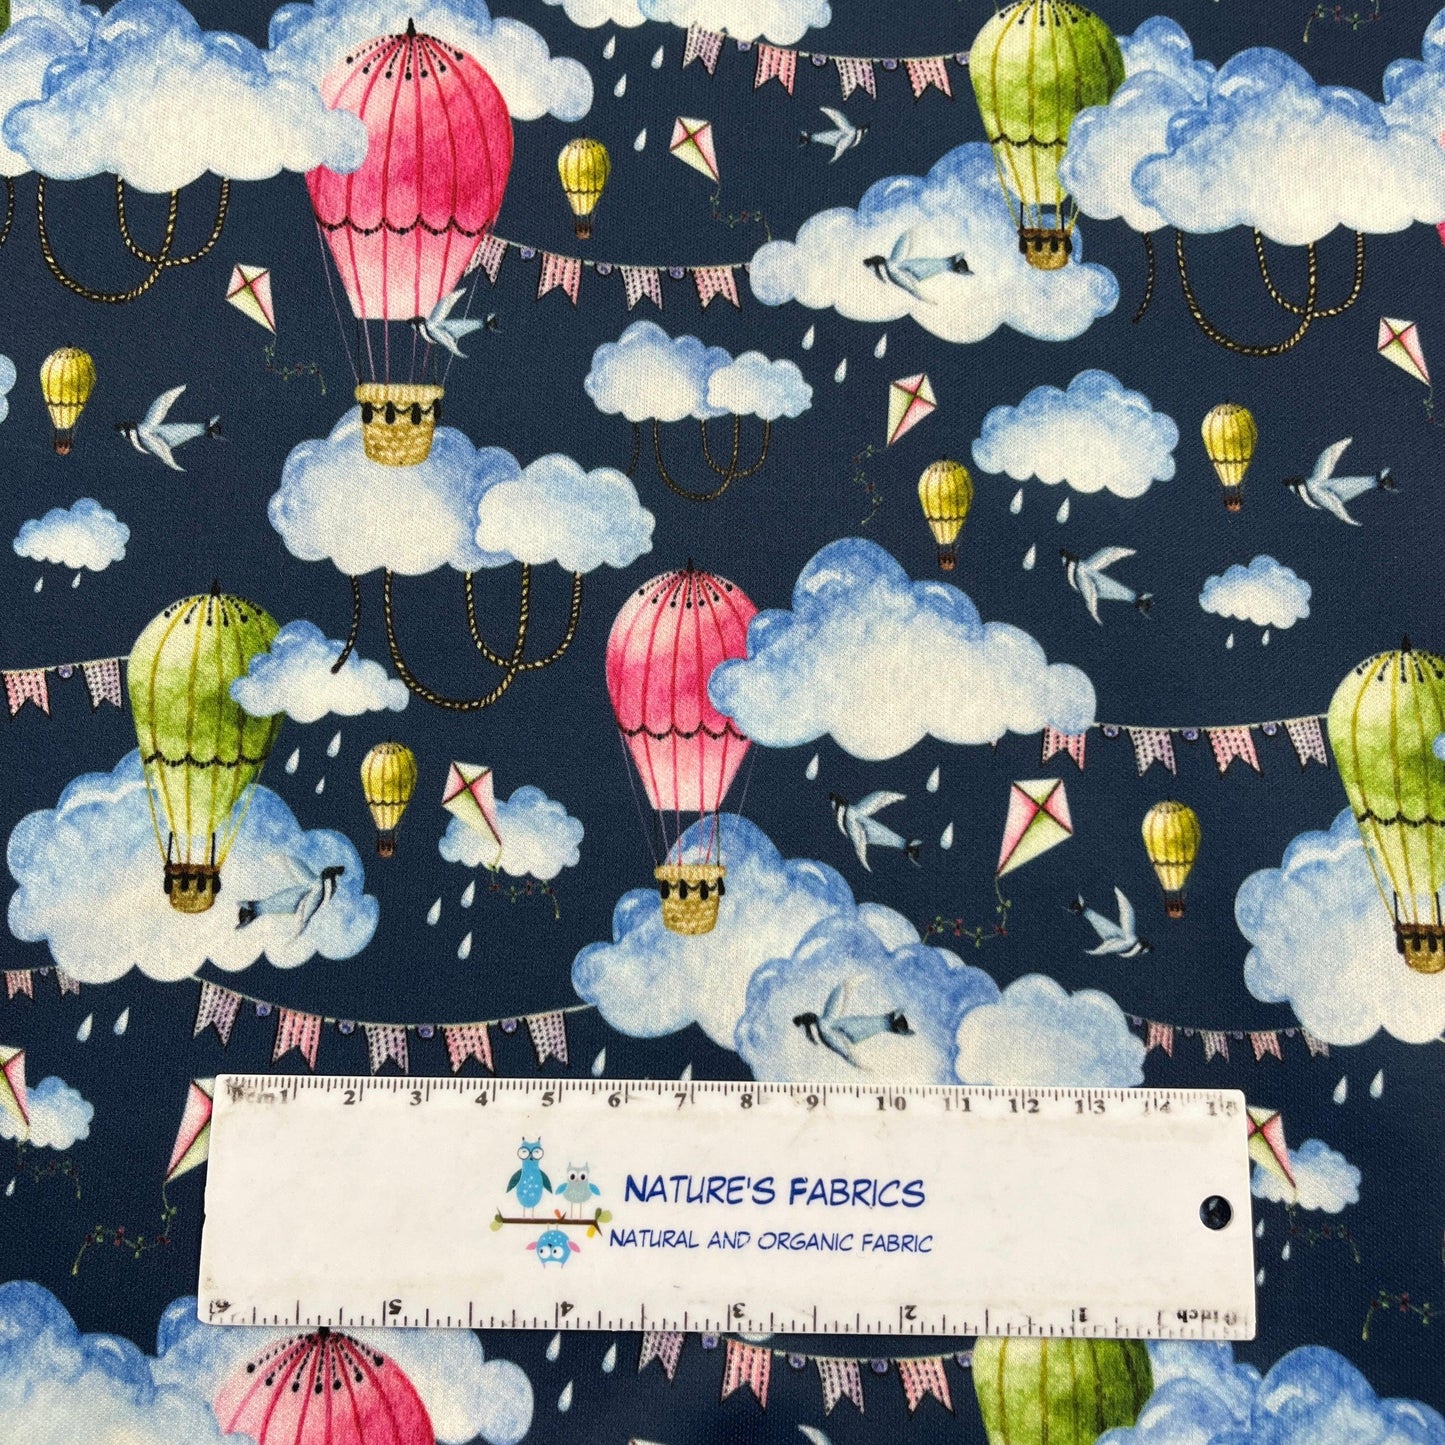 Hot Air Balloons on Navy 1 mil PUL Fabric - Made in the USA - Nature's Fabrics